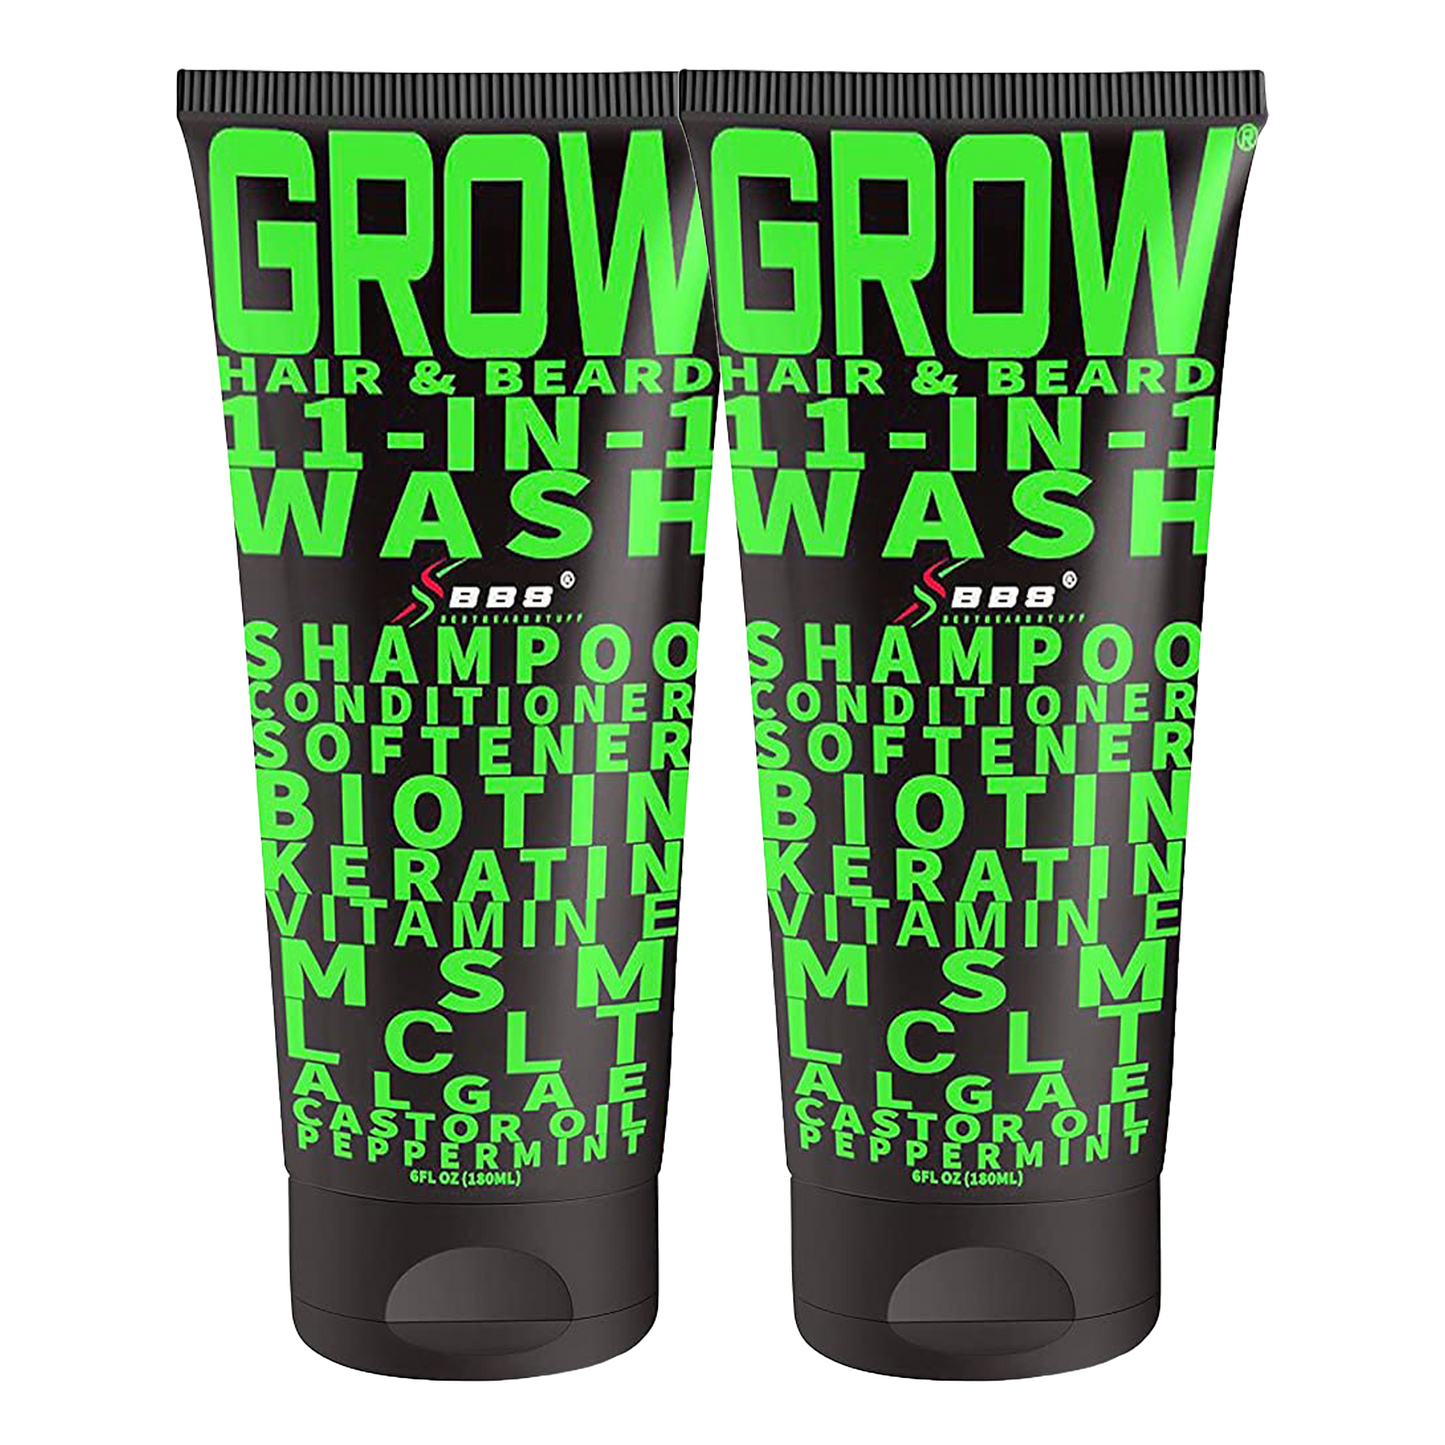 The GROW MORE!!! Double Pack of GROW® Hair & Beard 11-in-1 Wash